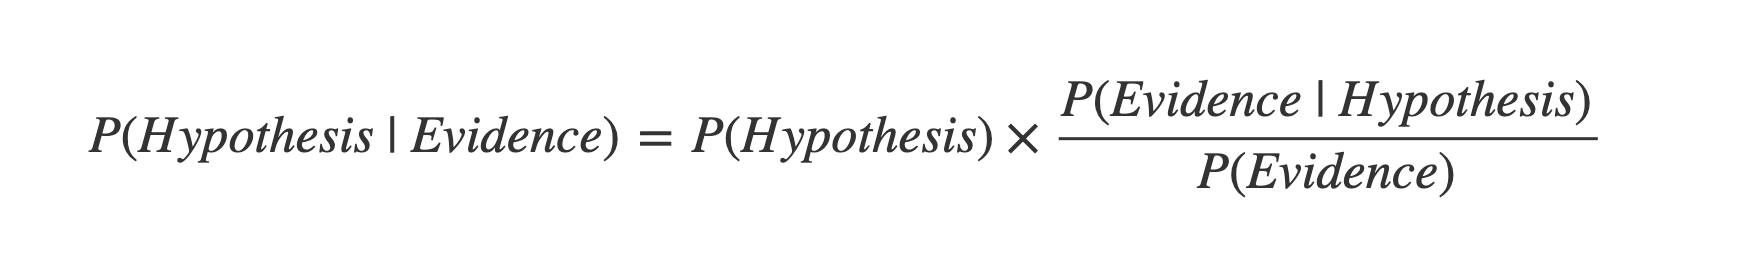 Probability the hypothesis is true, given the evidence is present equals the prior probability of the hypothesis being true times the likelihood of the evidence being present given the hypothesis is true, divided by the marginal probability of the evidence being present under any circumstance